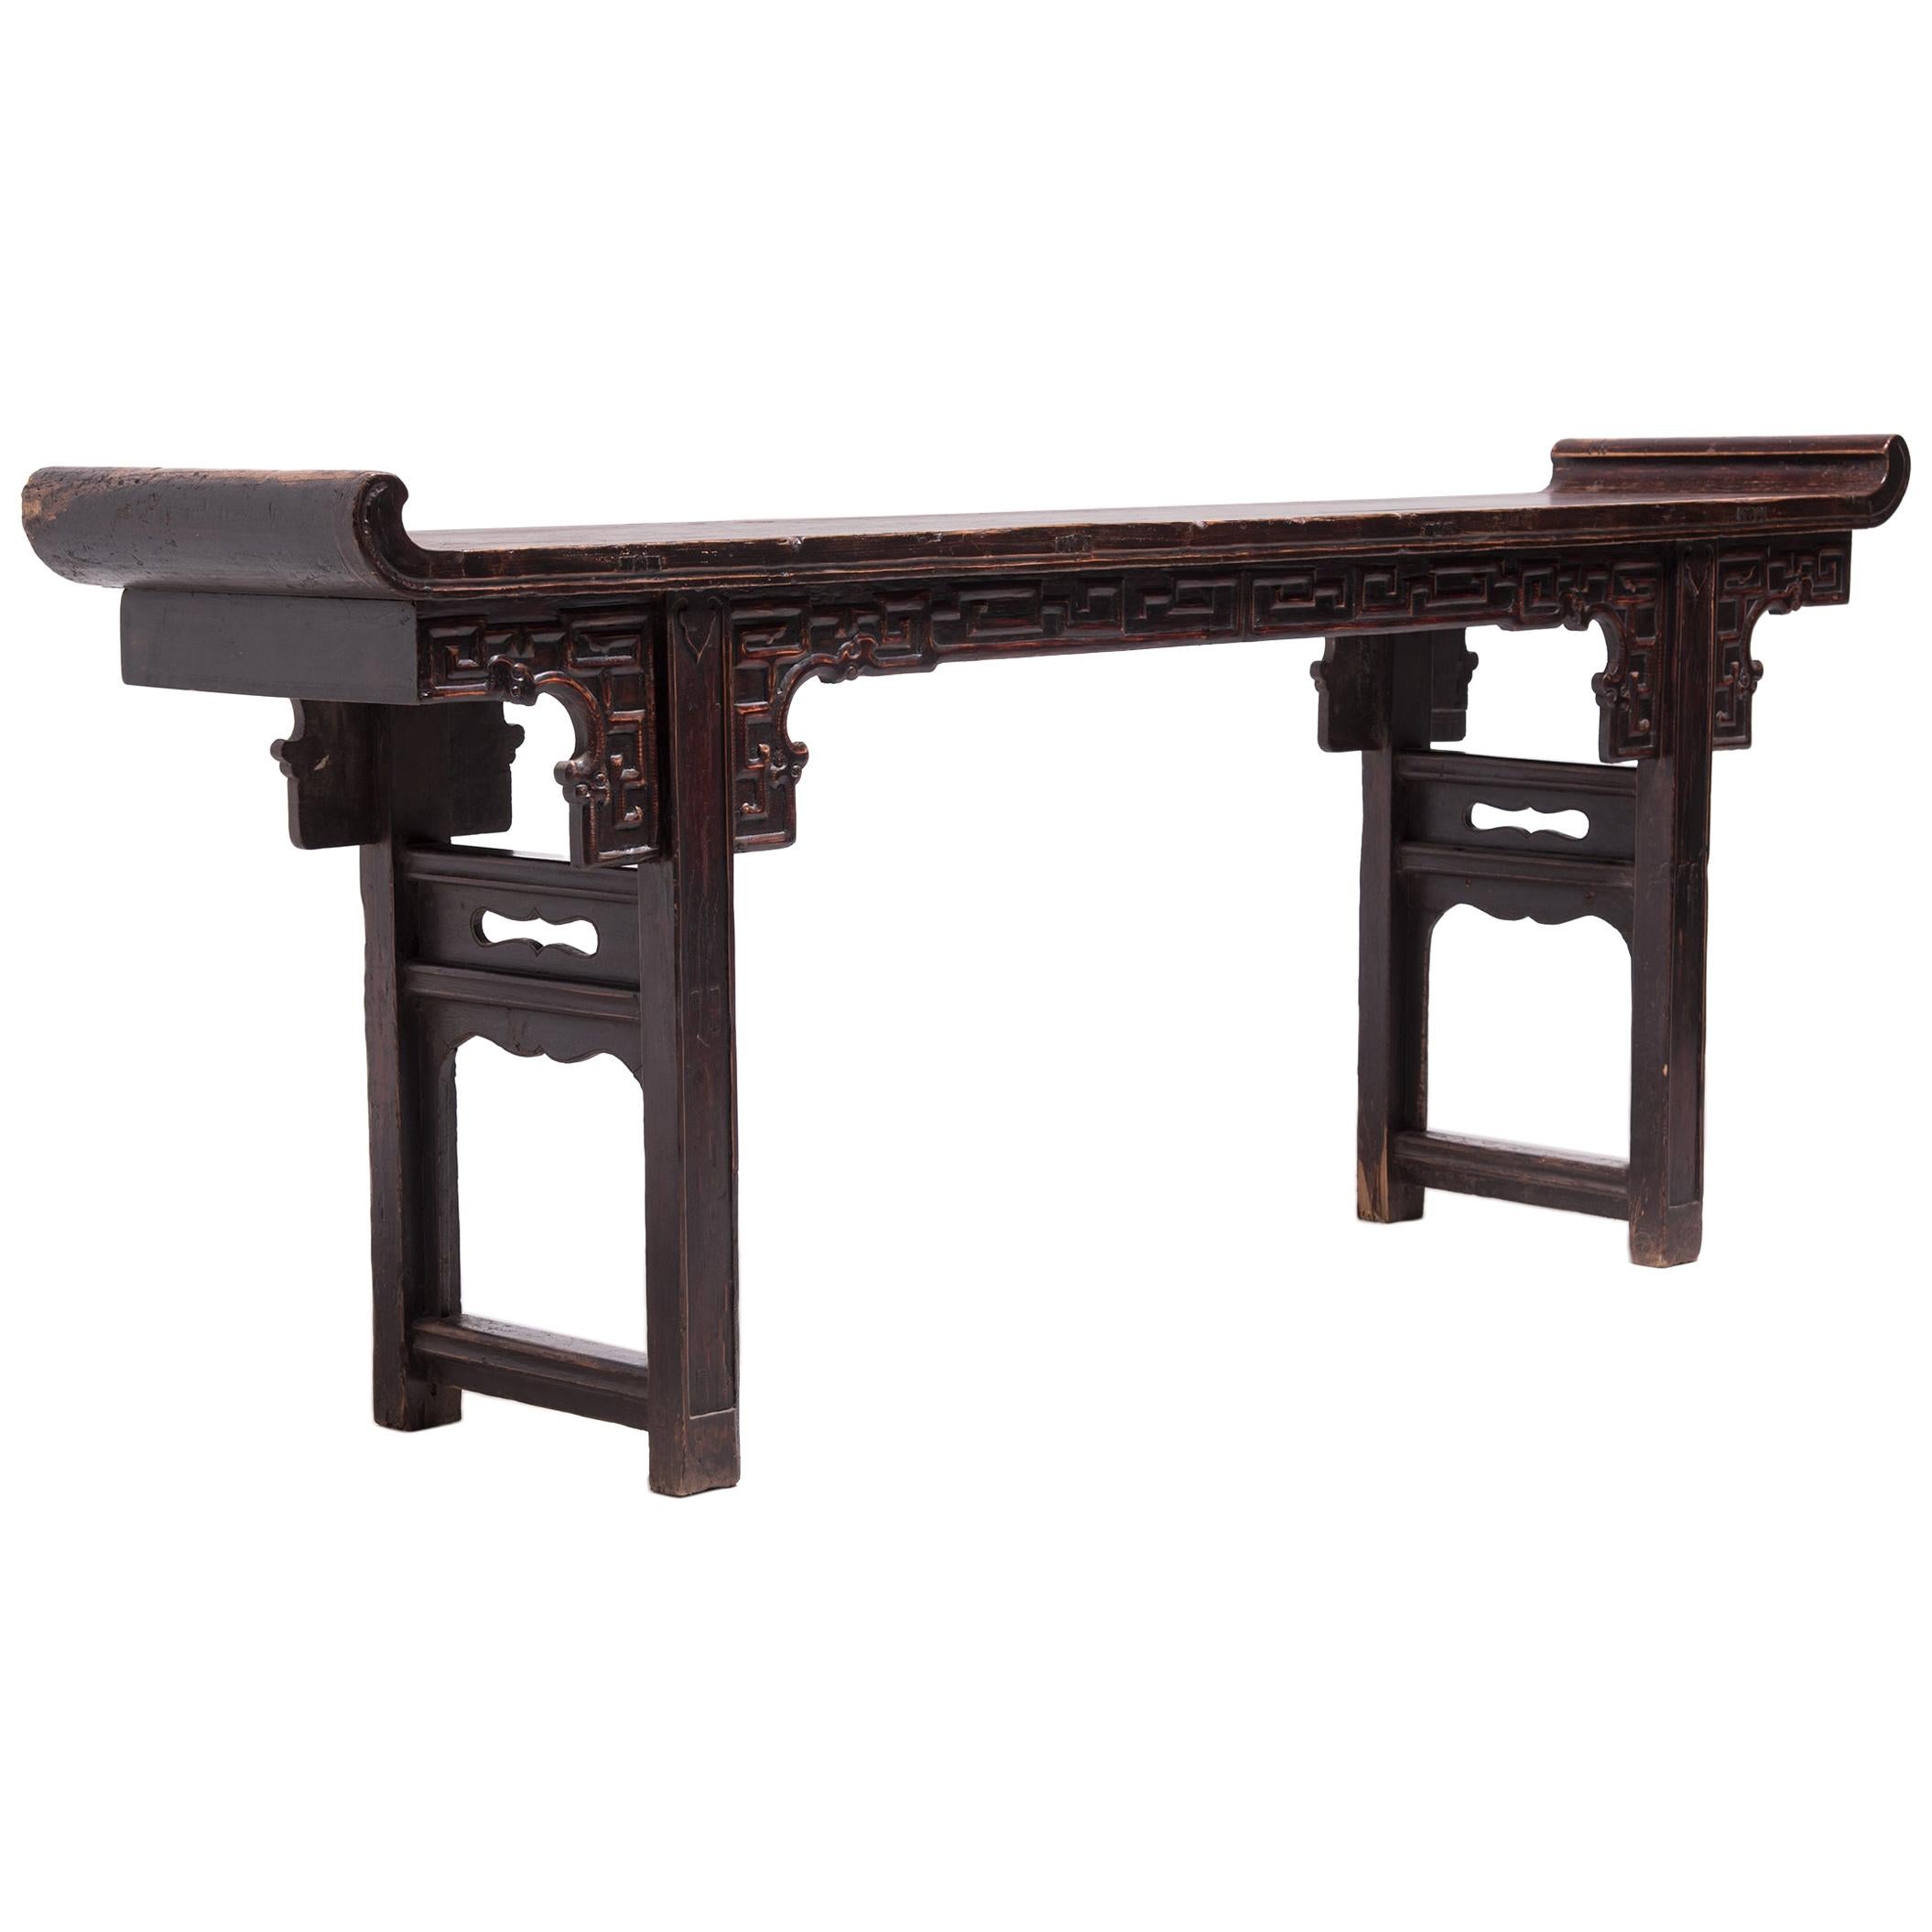 Chinese Altar Table with Everted Ends, circa 1800